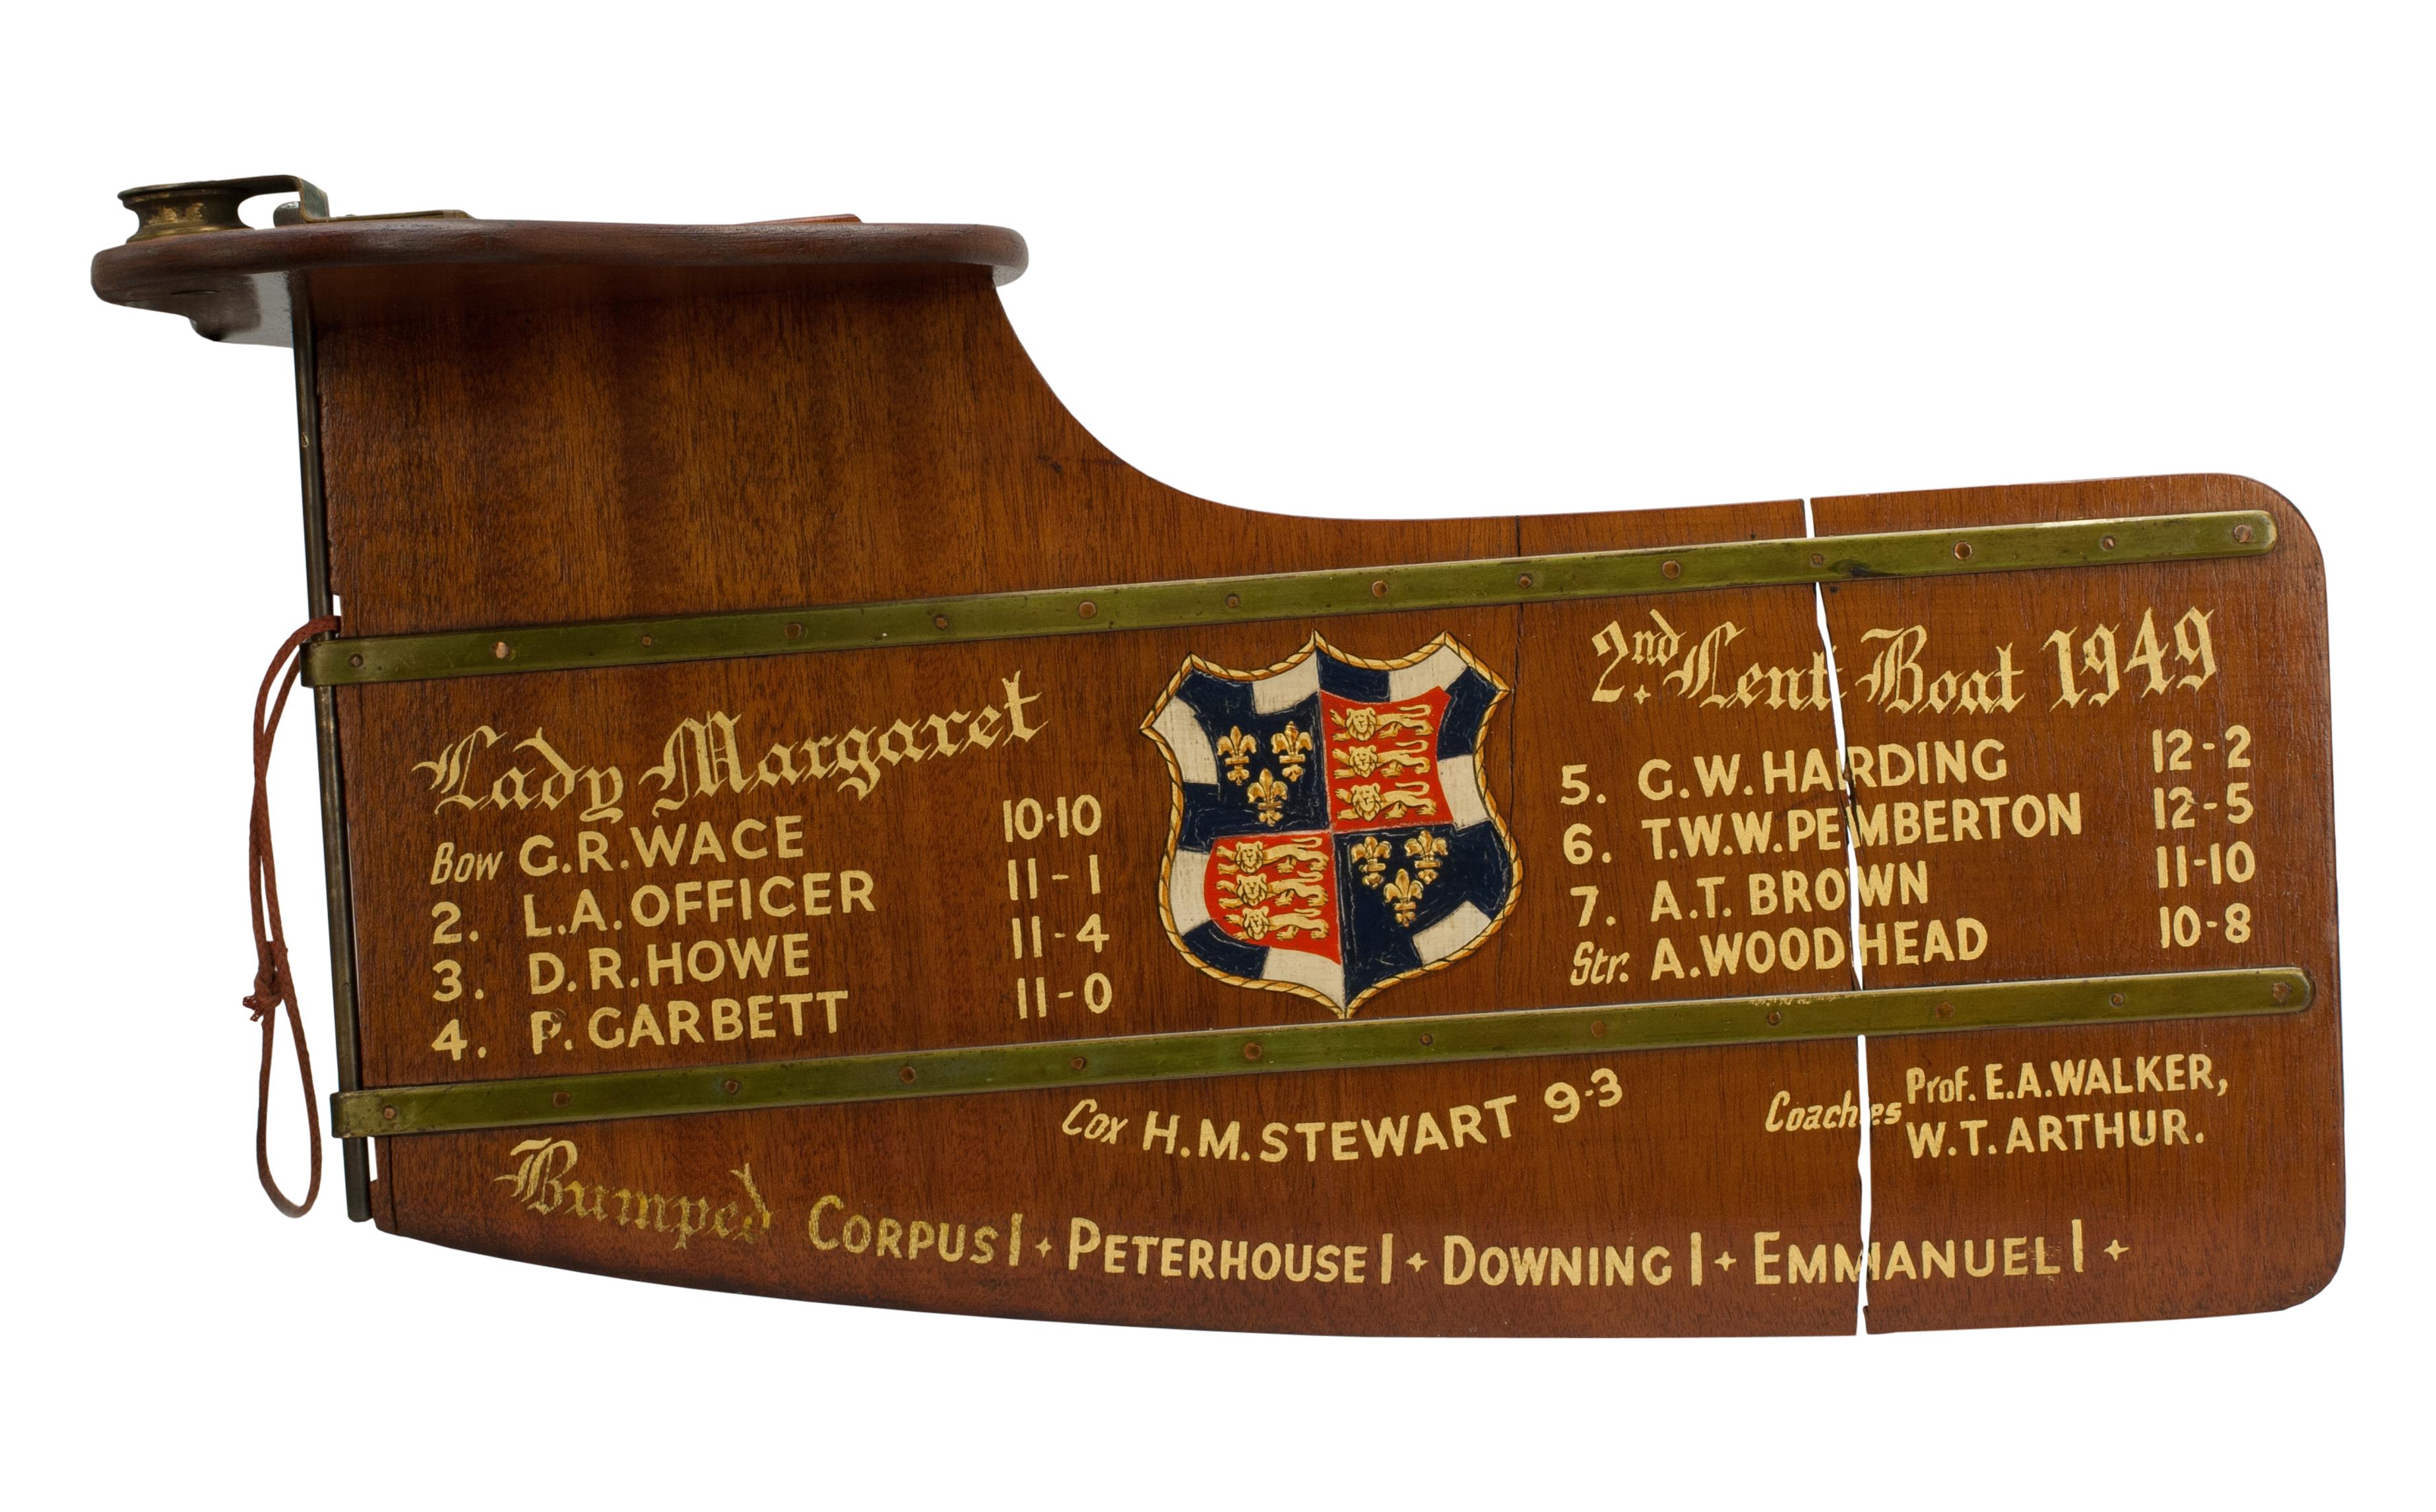 Cambridge University Rowing Rudder.
An original presentation trophy rudder 'Lady Margaret 2nd Lent Boat' with gold calligraphy and college insignia. This is the former property of H.M. Stewart who was the cox. The college crest is of St John's